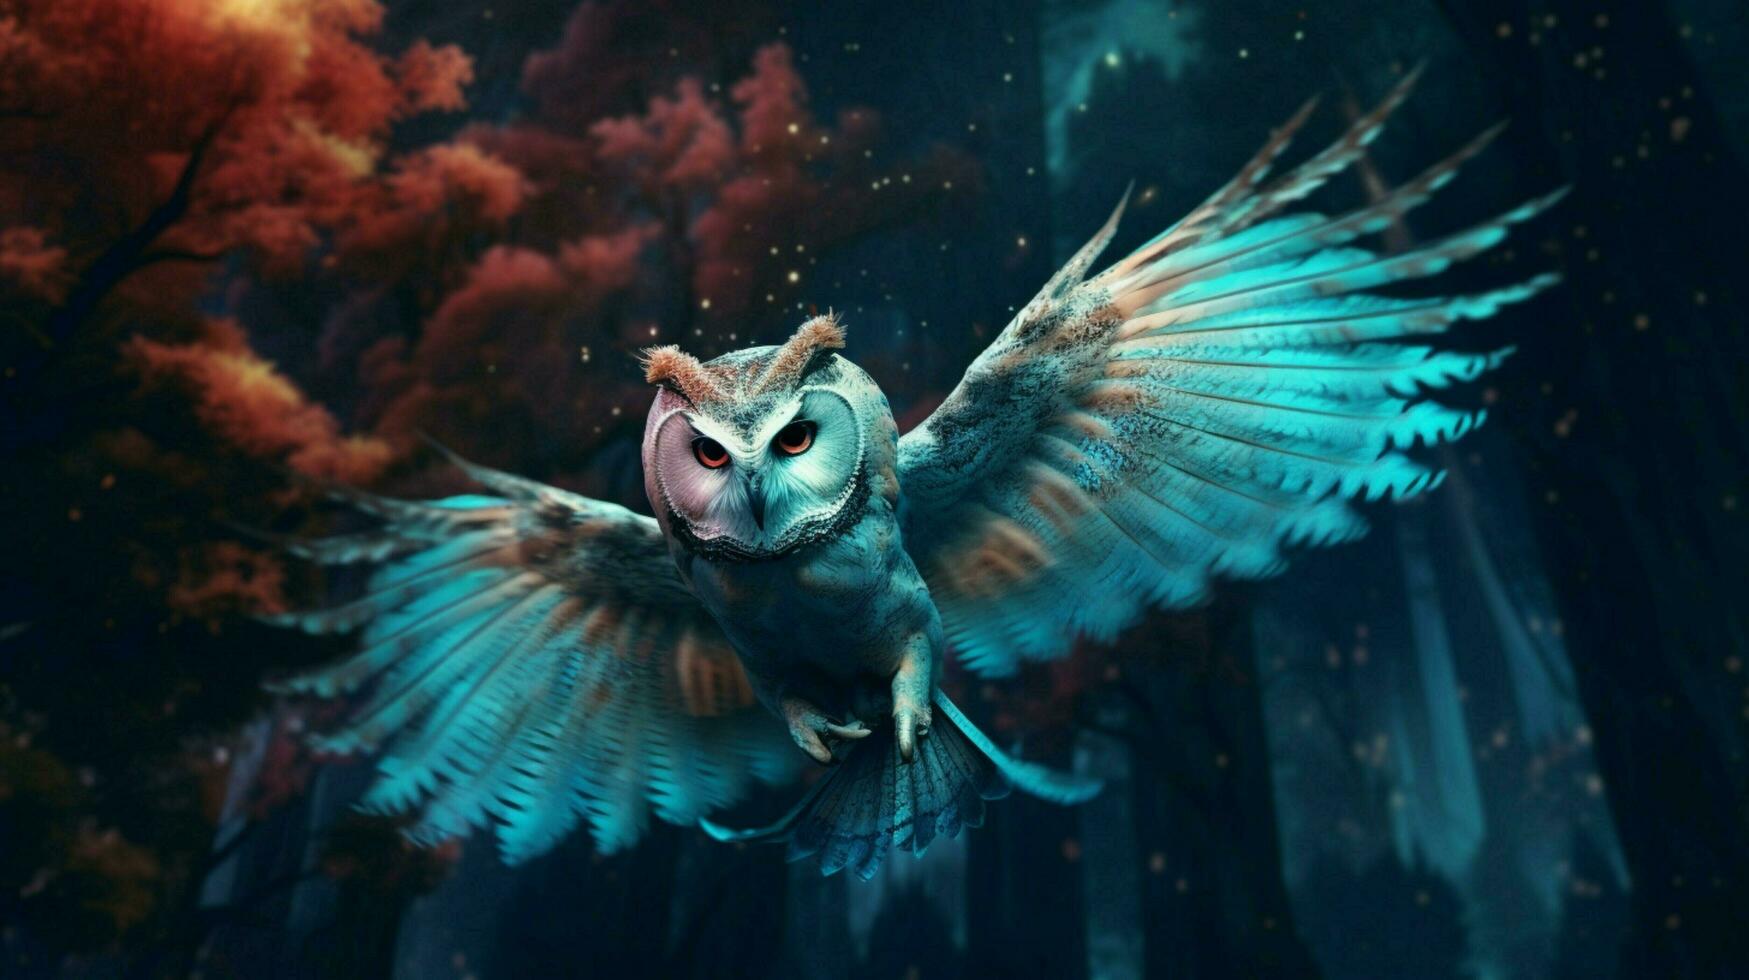 trippy owl flying through ethereal forest photo